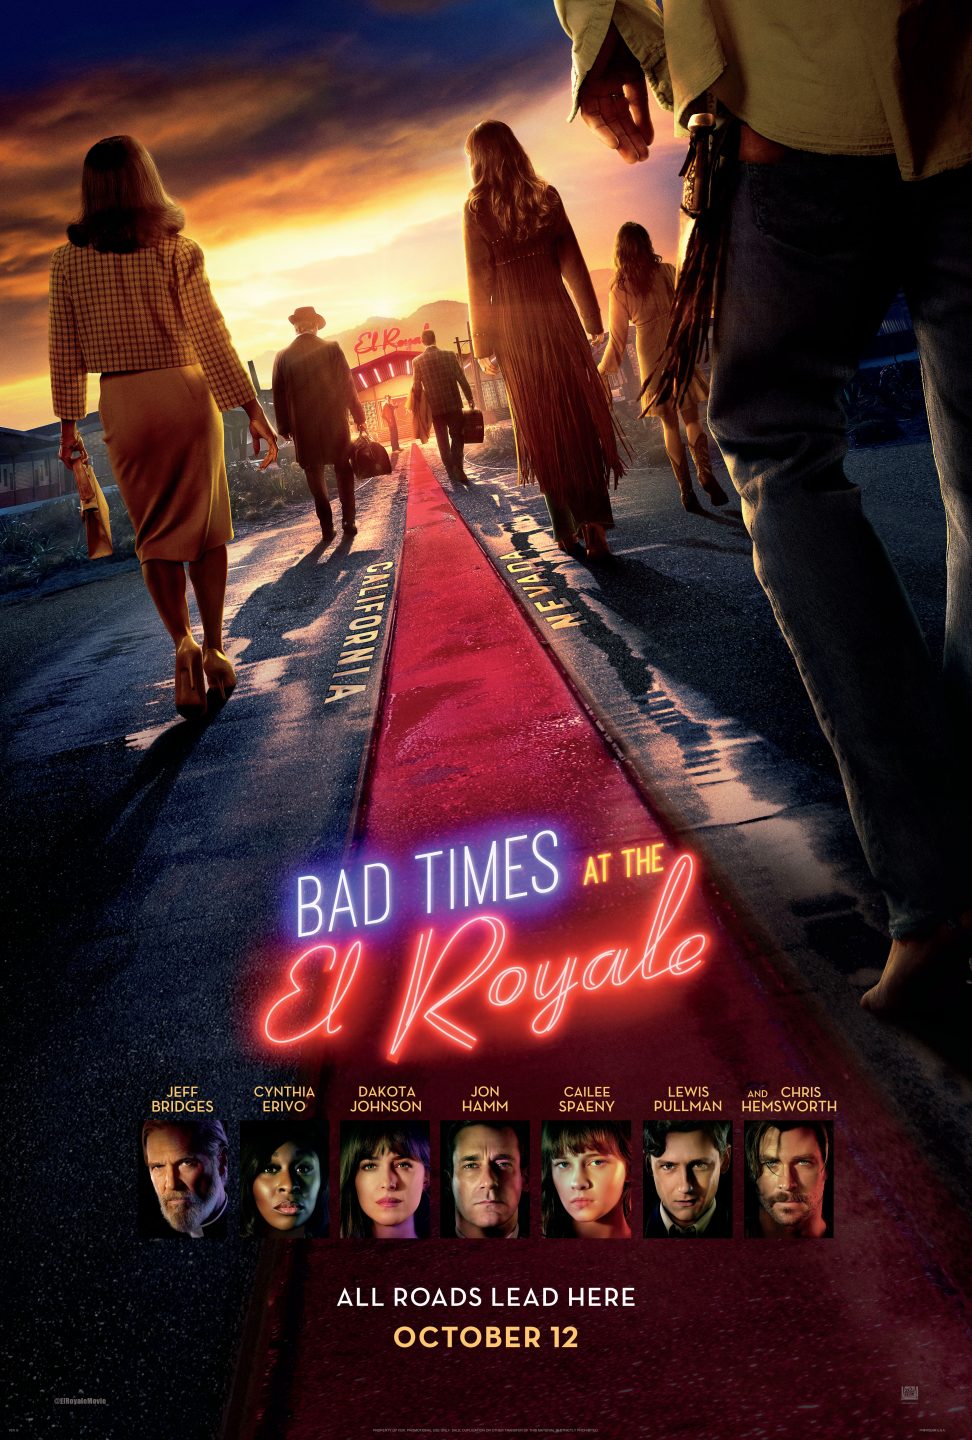 Bad Times At The El Royale poster (20th Century Fox)